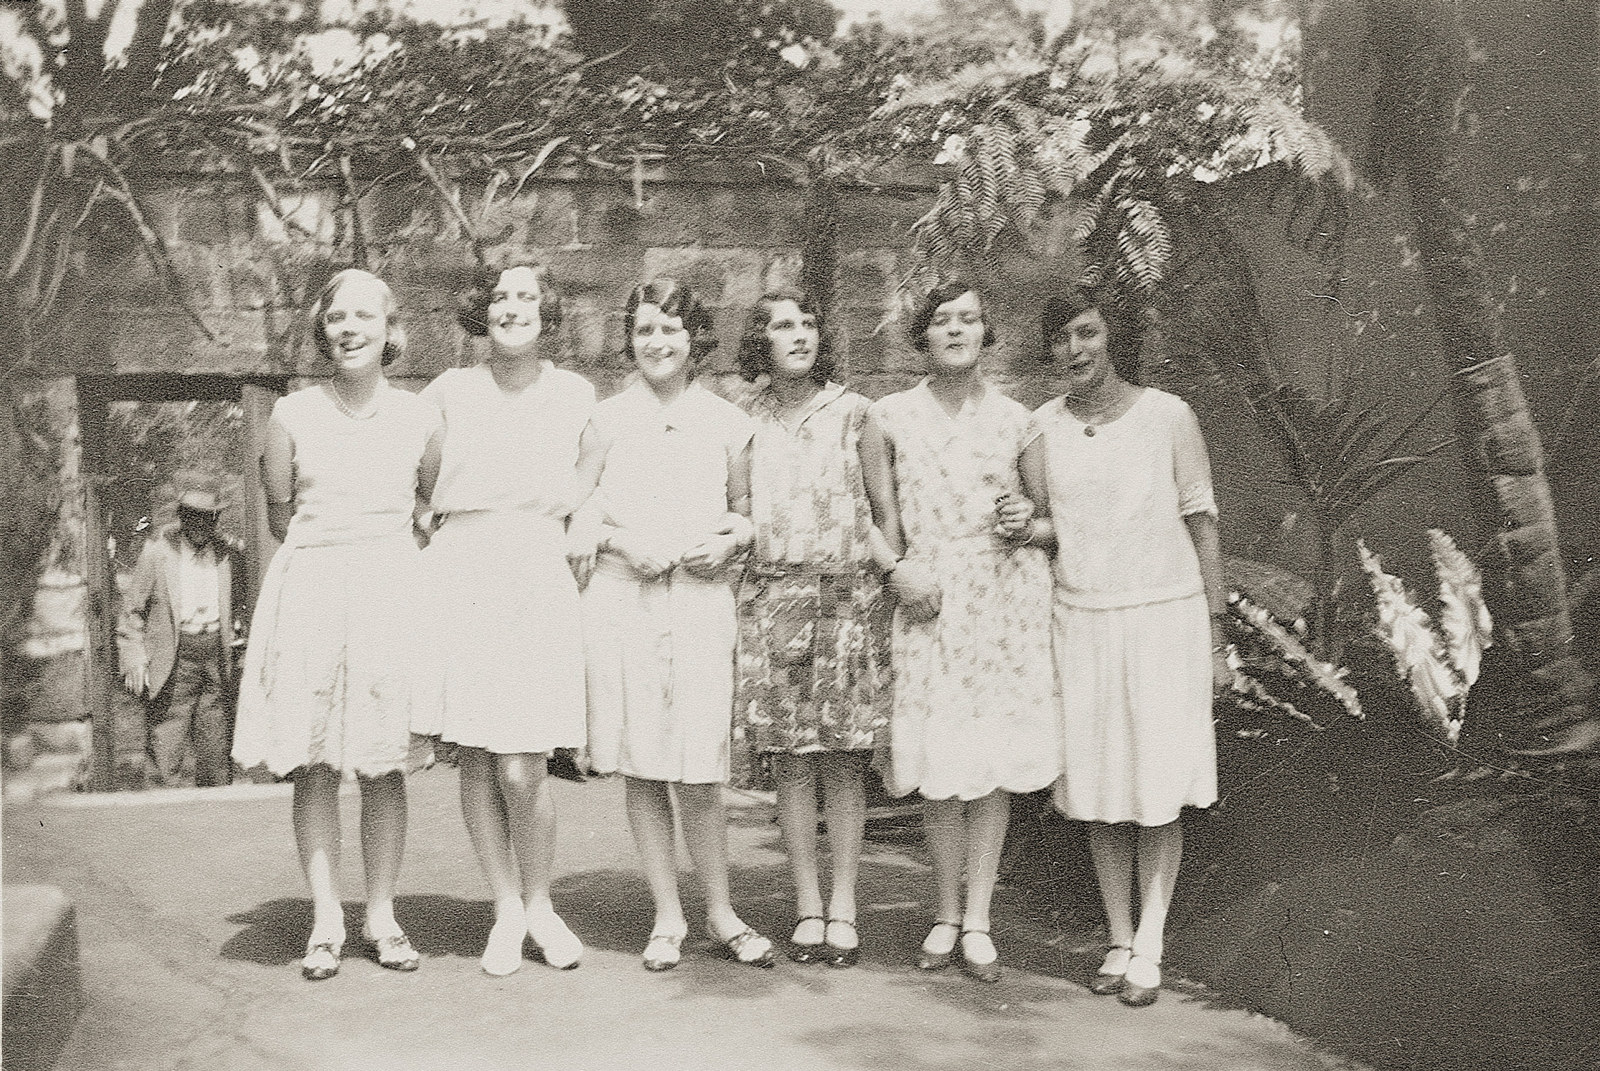 A group portrait of 6 women standing in front of a stone wall with shrubs growing over it. The women have linked arms and are all smiling at the camera.